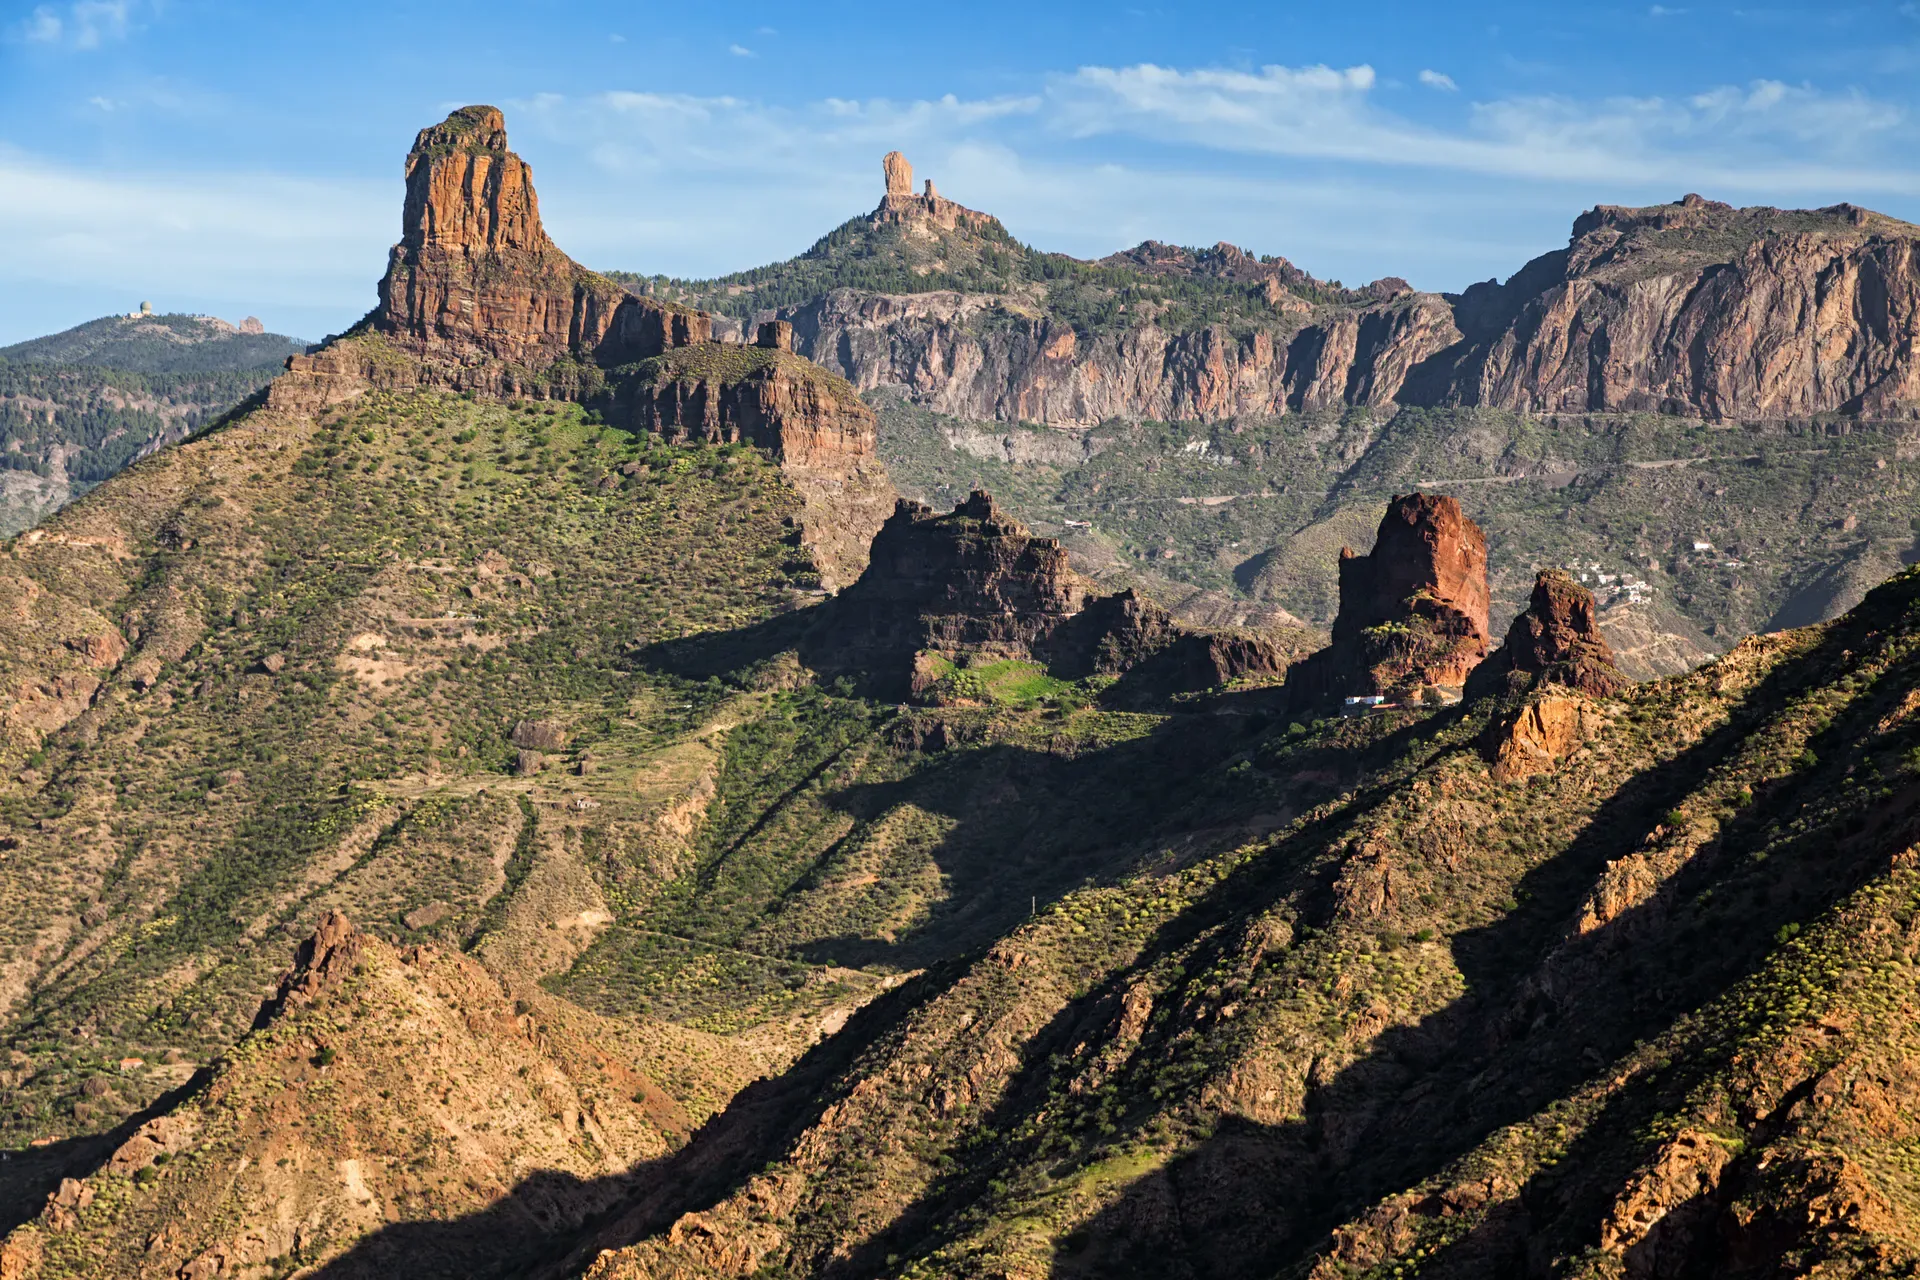 Views of Roque Bentayga in the foreground with Roque Nublo behind